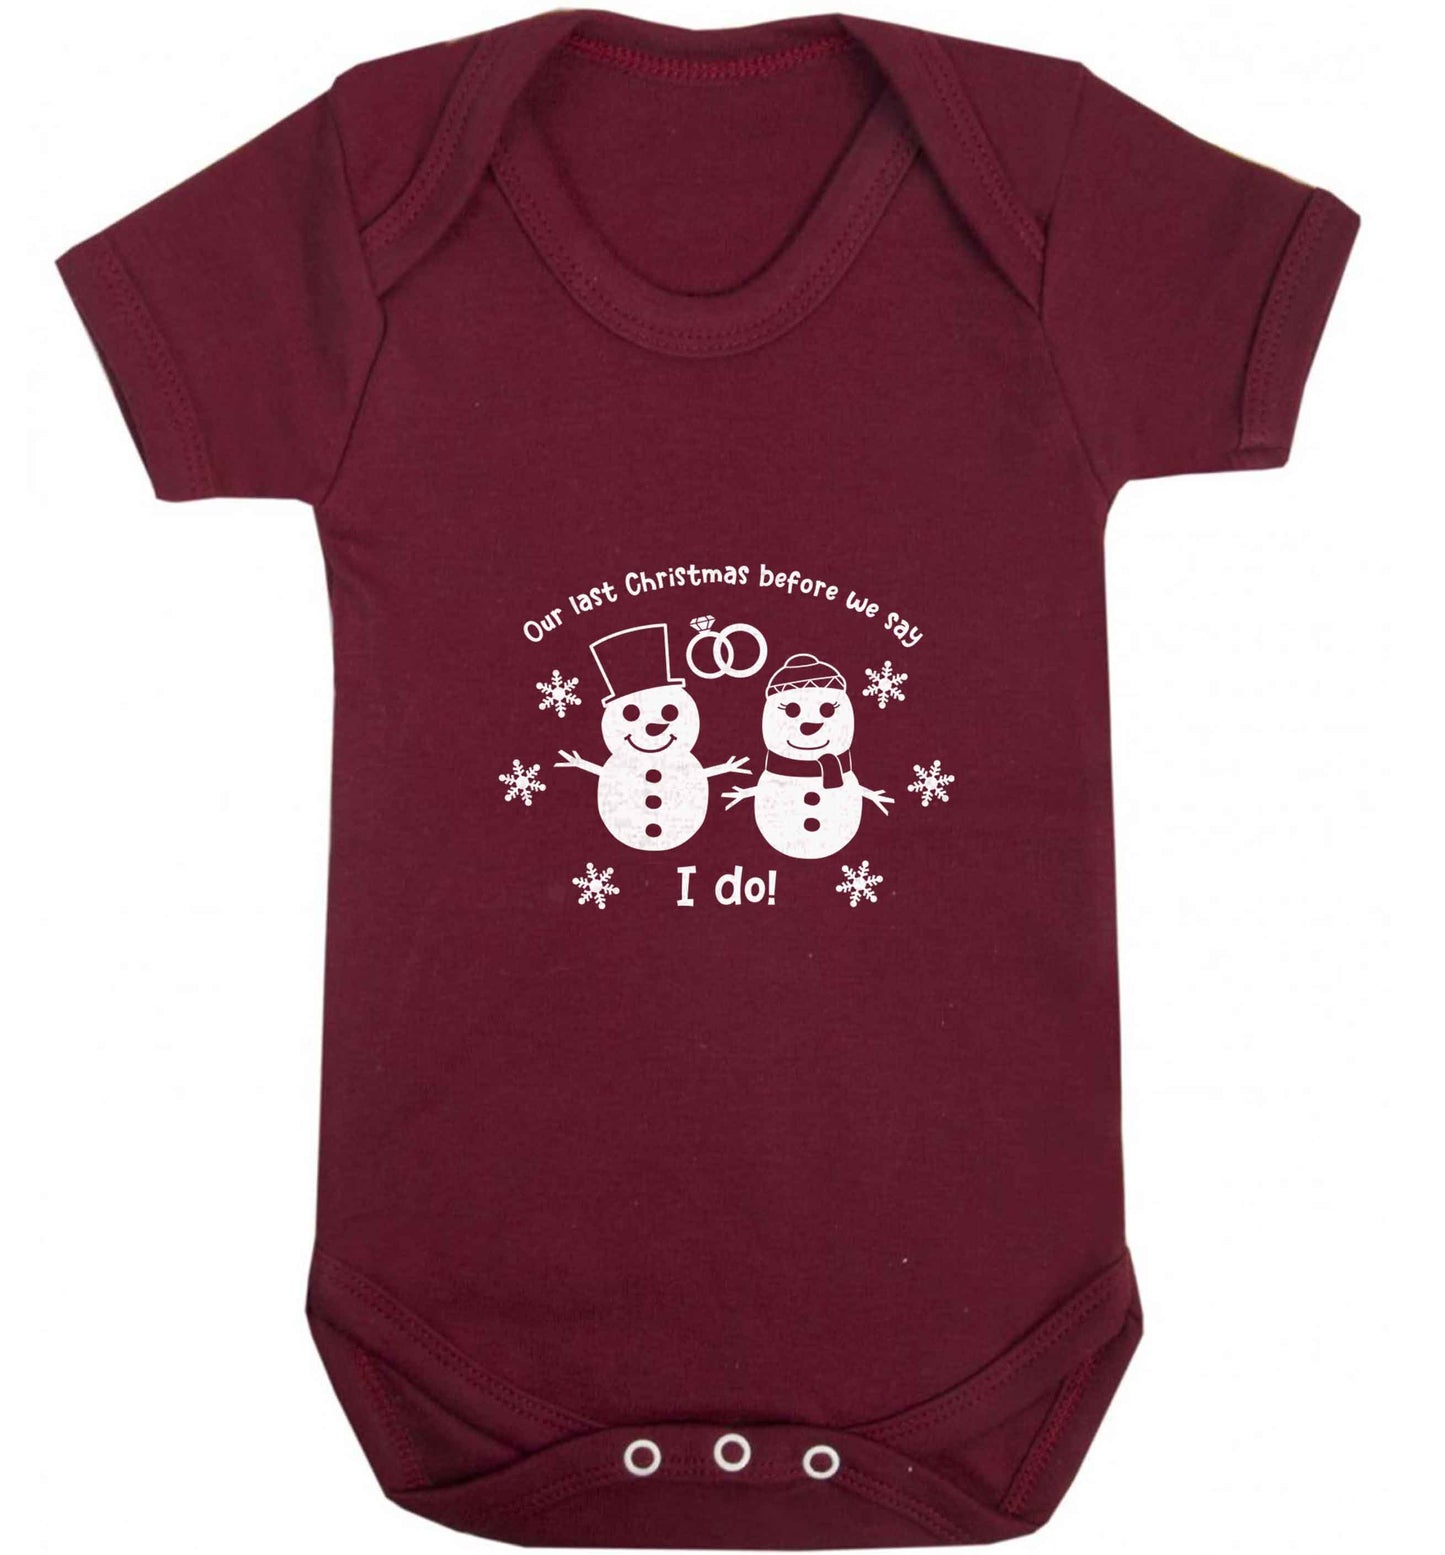 Last Christmas before we say I do baby vest maroon 18-24 months